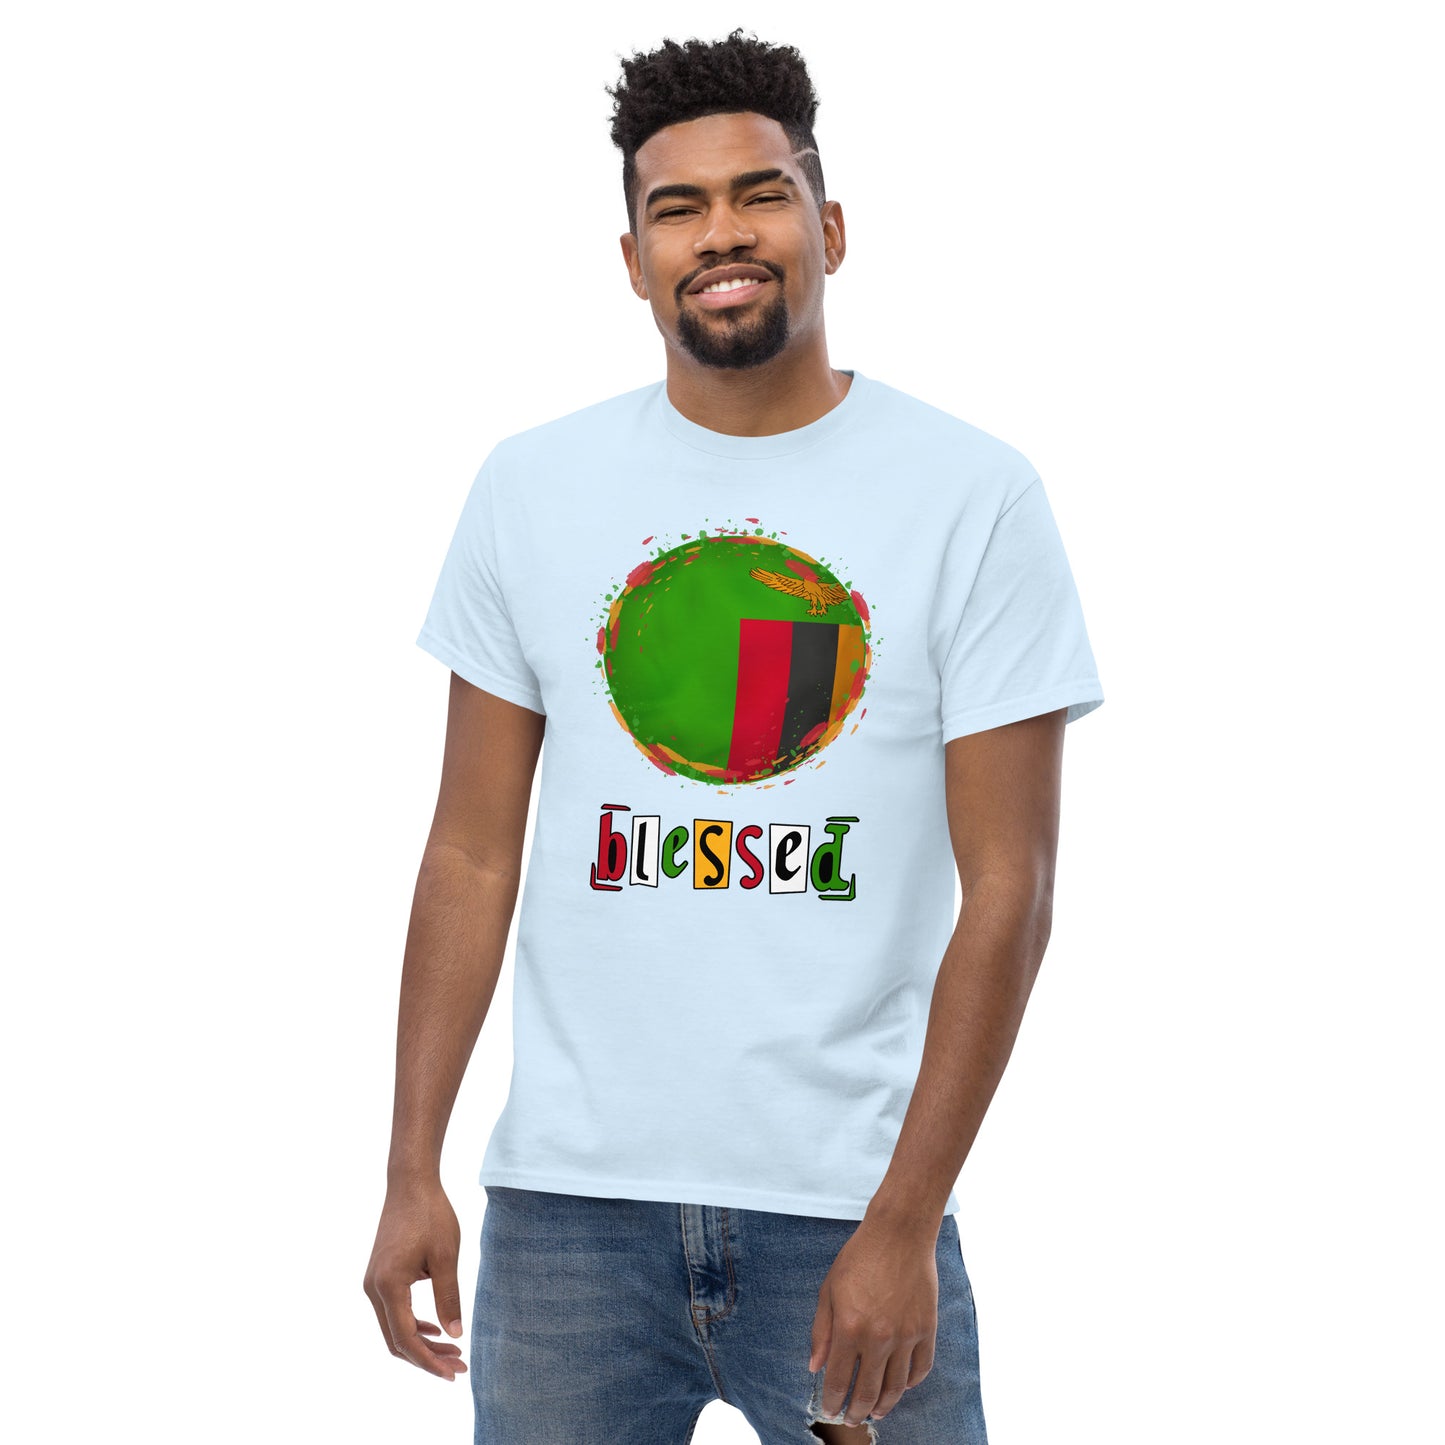 Men's classic Blessed t shirt